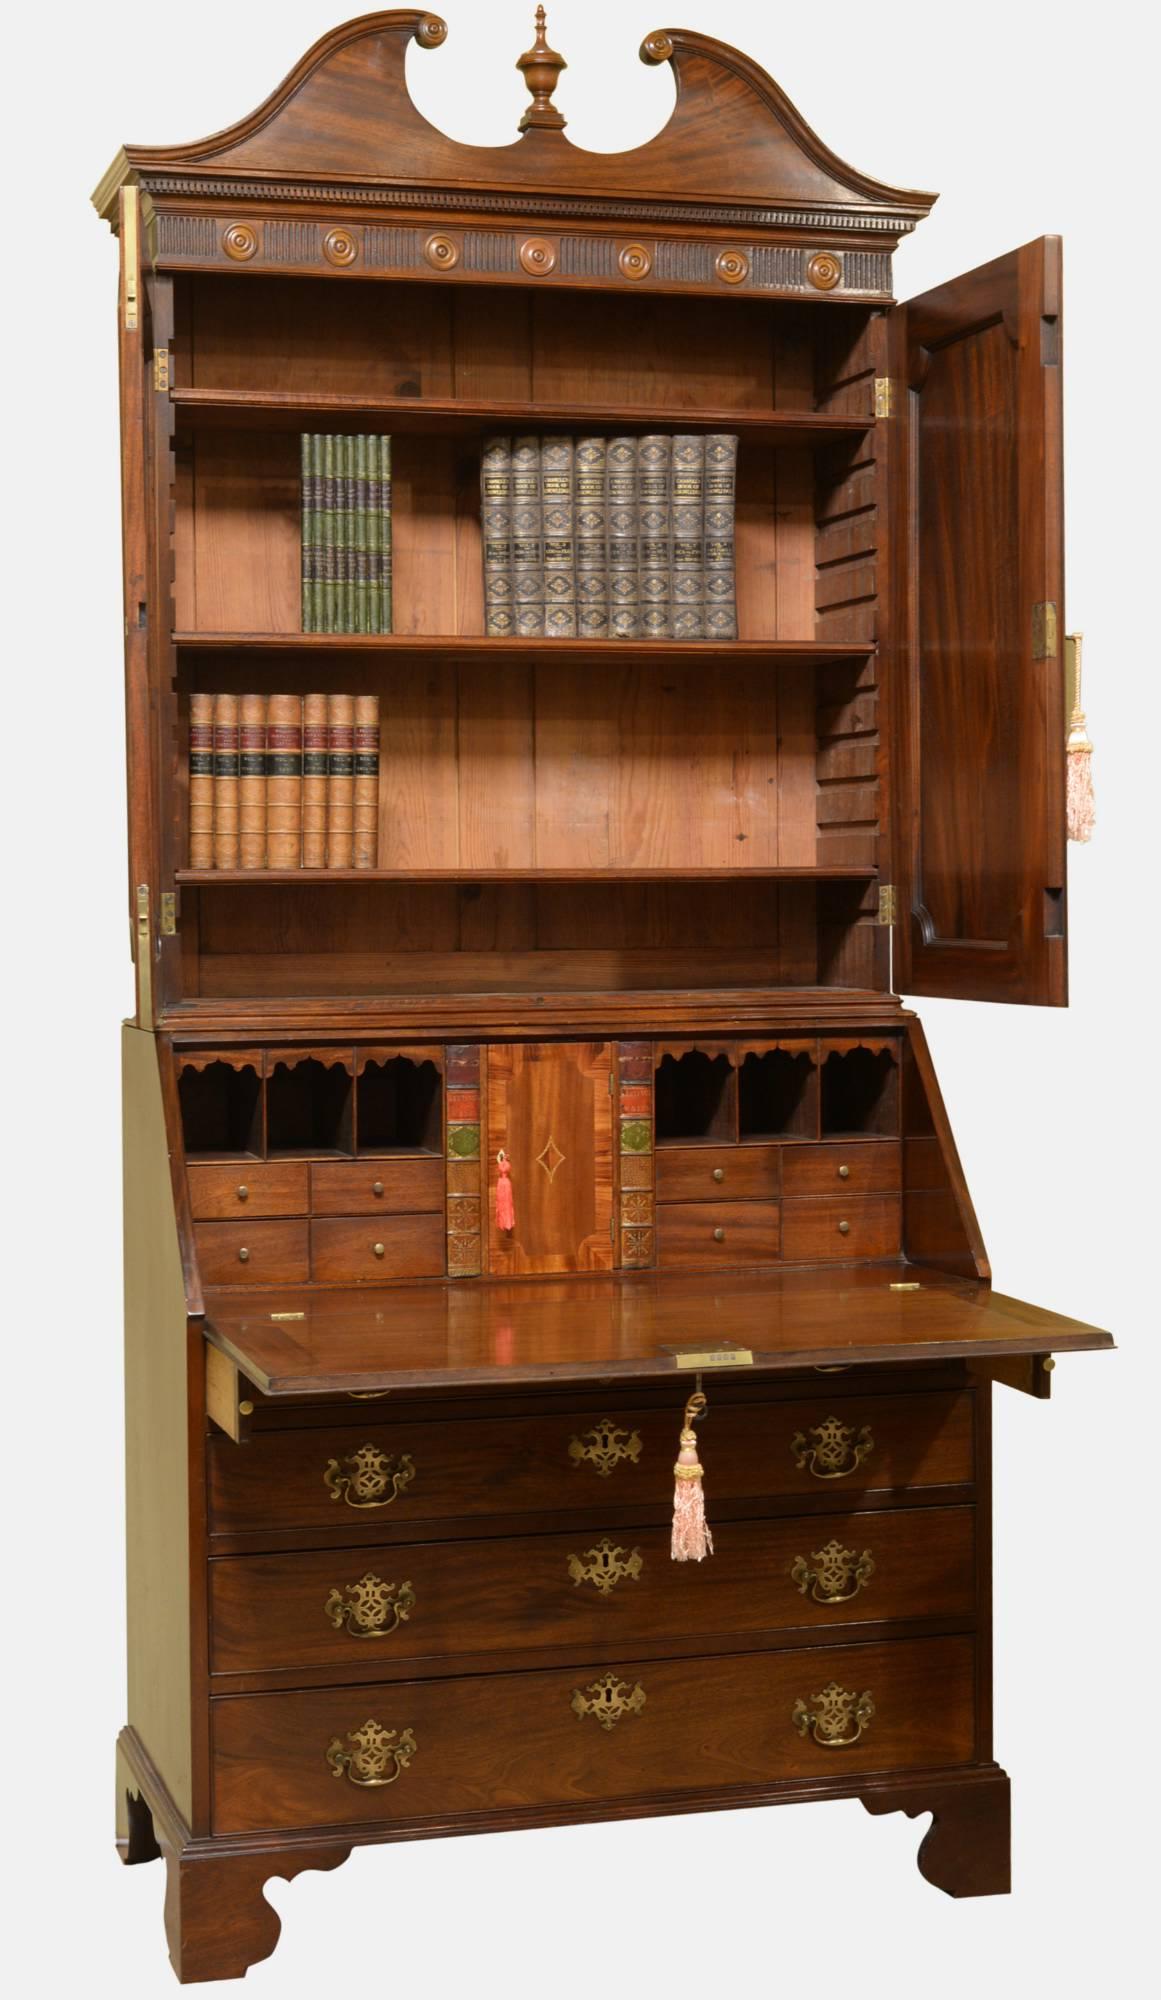 Mahogany bureau bookcase. Oak drawer linings, secret drawers, swan pediment with finial. Has roundels and finely executed dentil moulding, Kingwood crossbanding to interior cupboard door. Replacement handles,

circa 1760.